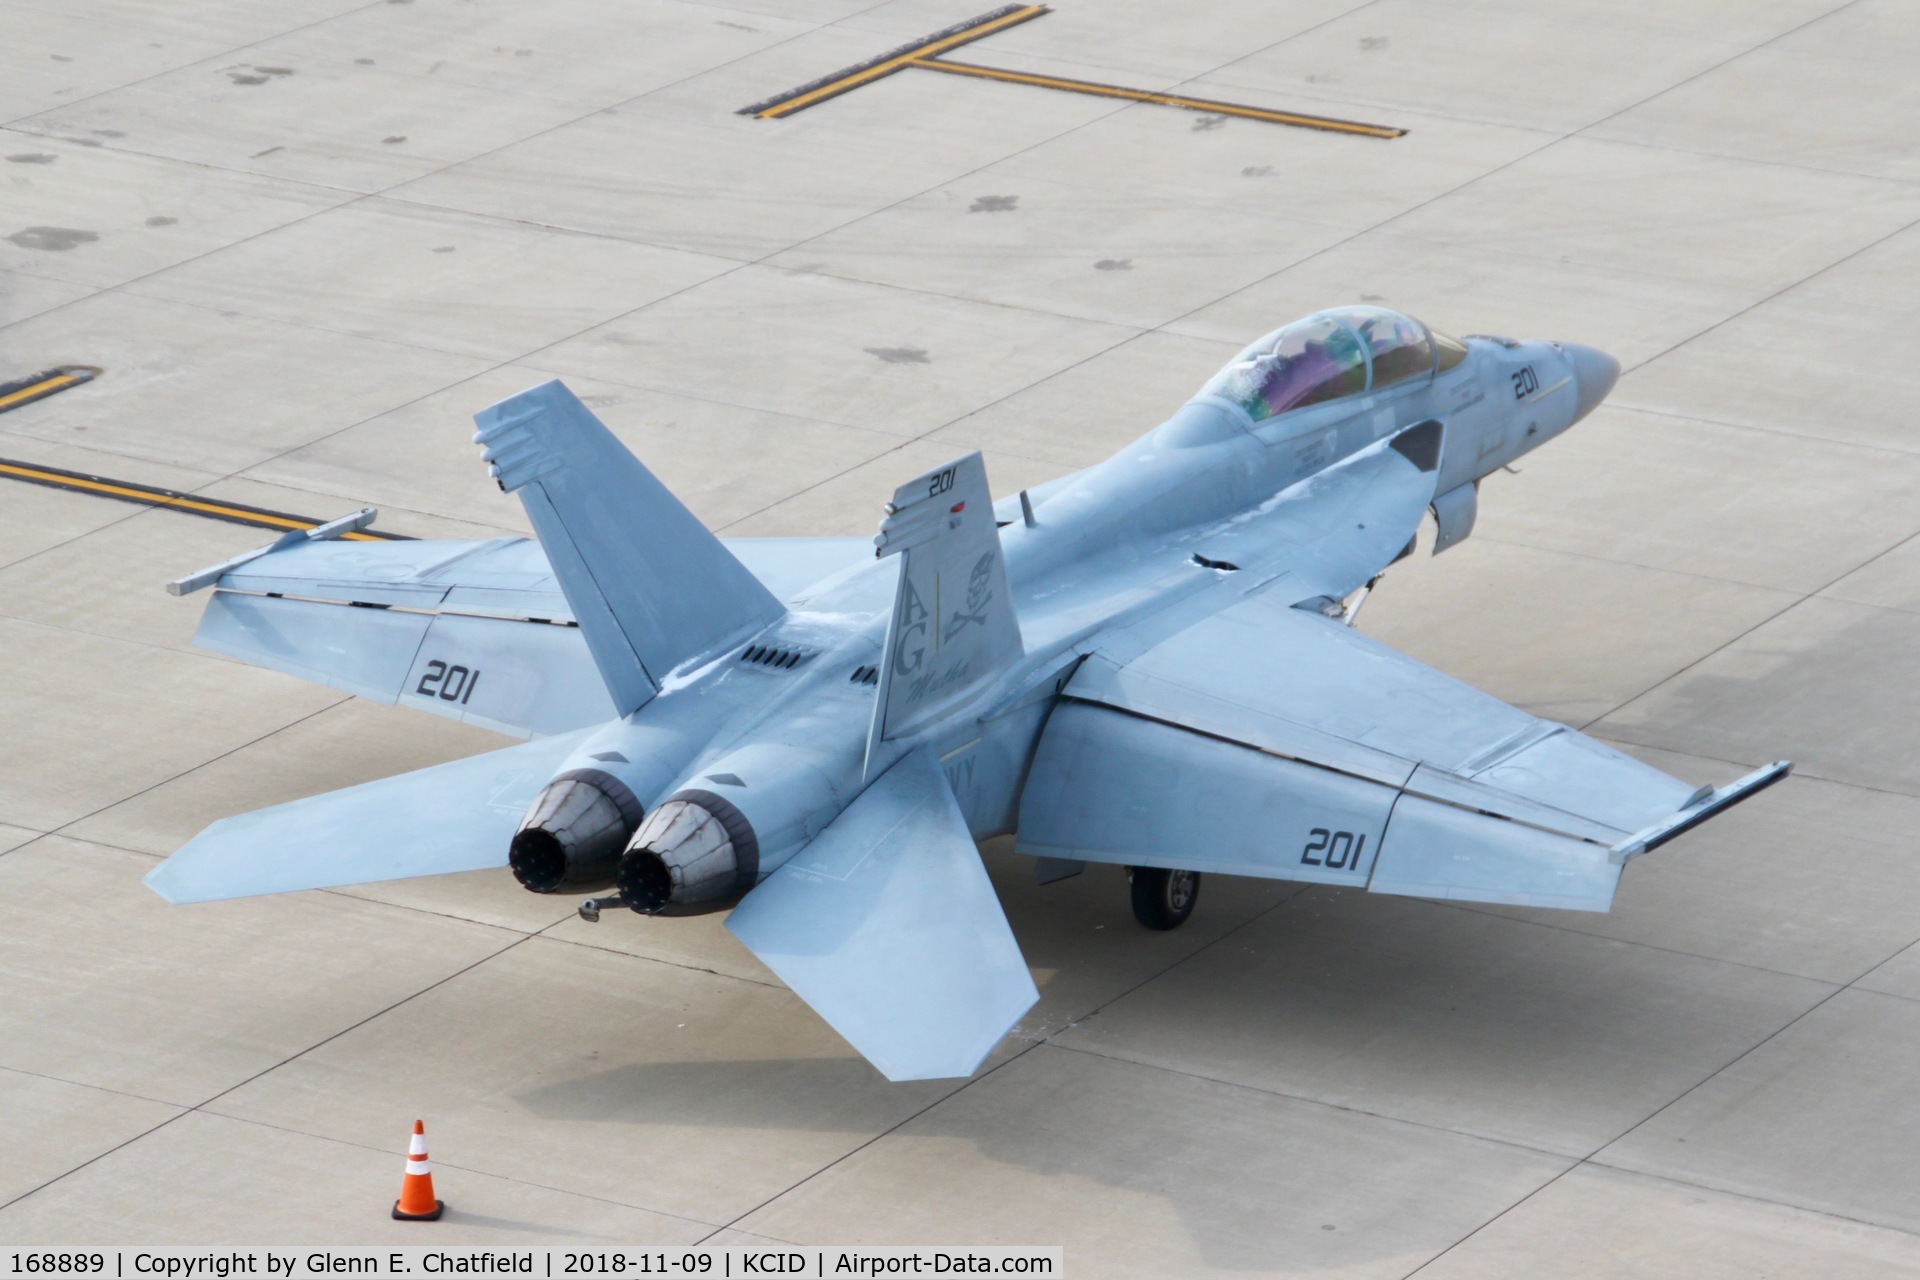 168889, Boeing F/A-18F Super Hornet C/N F270, Photographed from the control tower